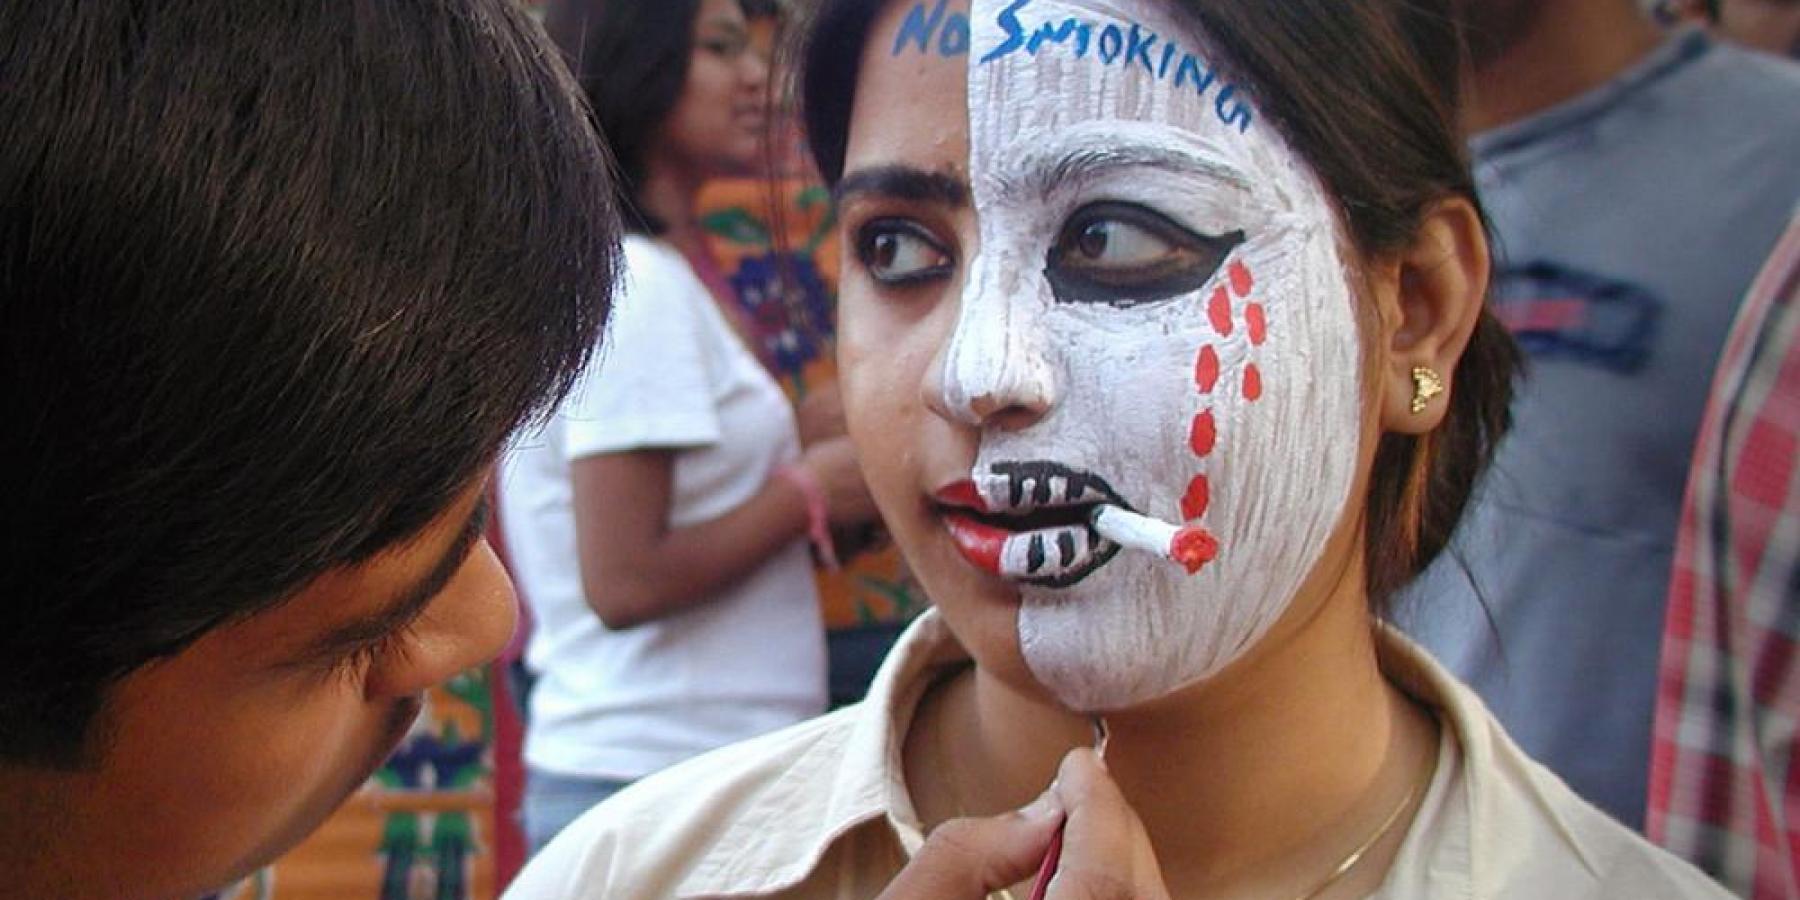 Close up of young woman with cigarette and half of face painted white 